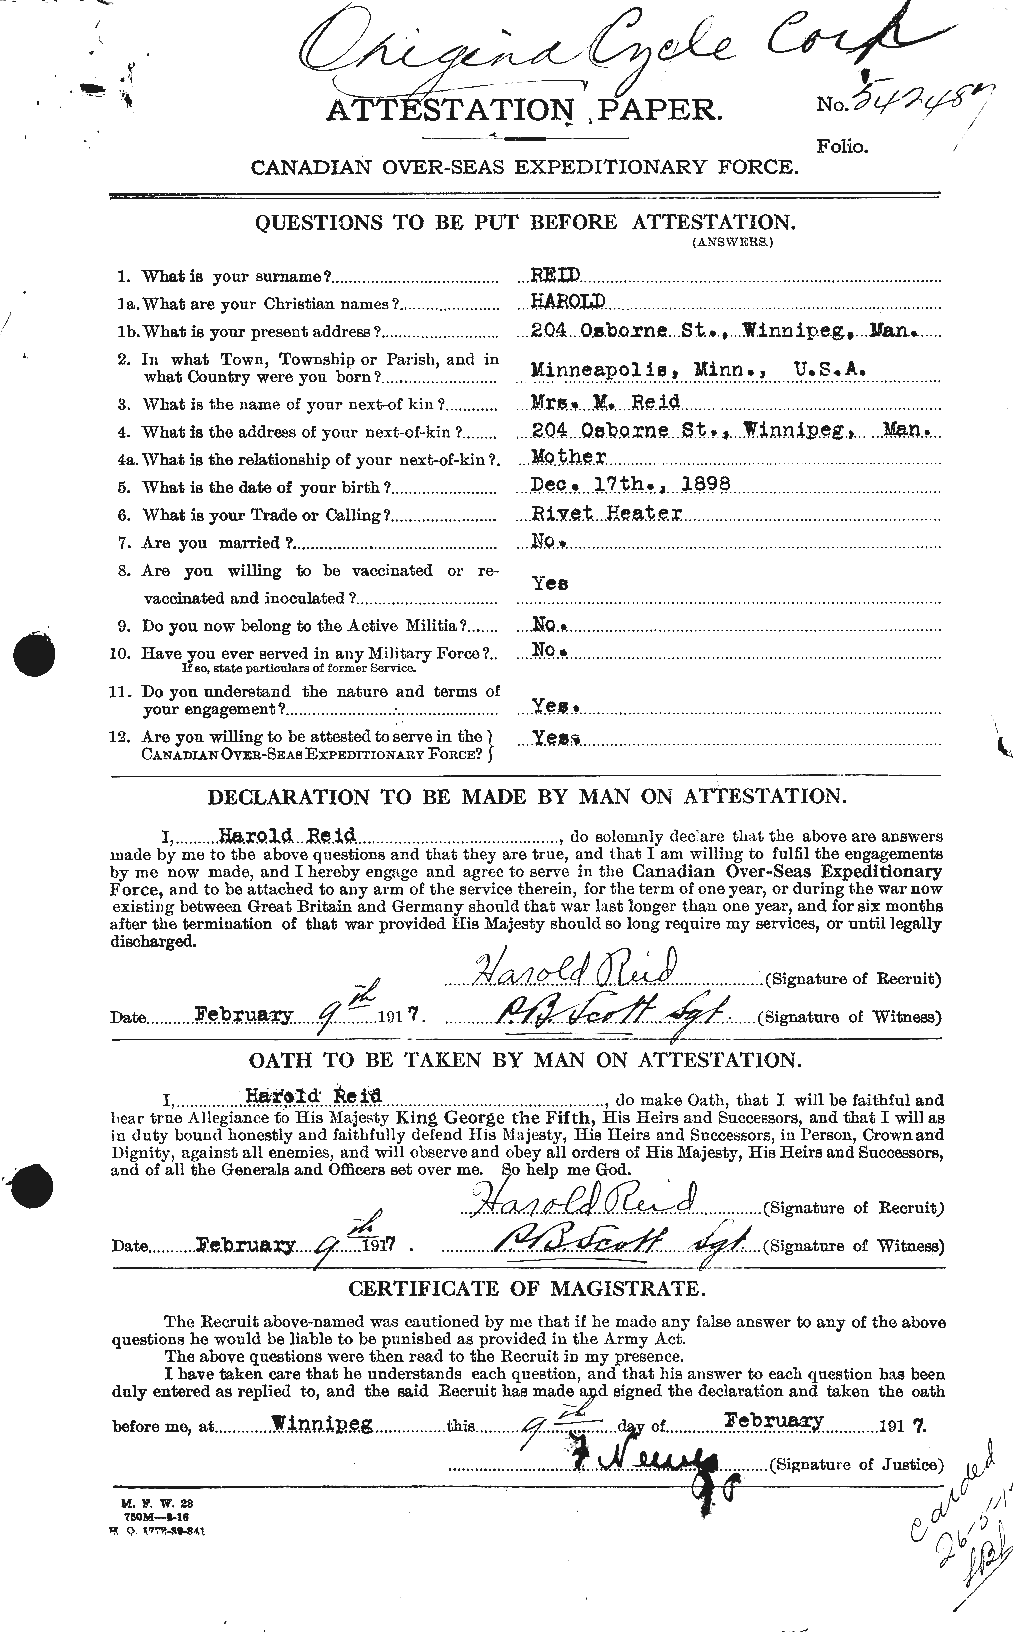 Personnel Records of the First World War - CEF 598564a